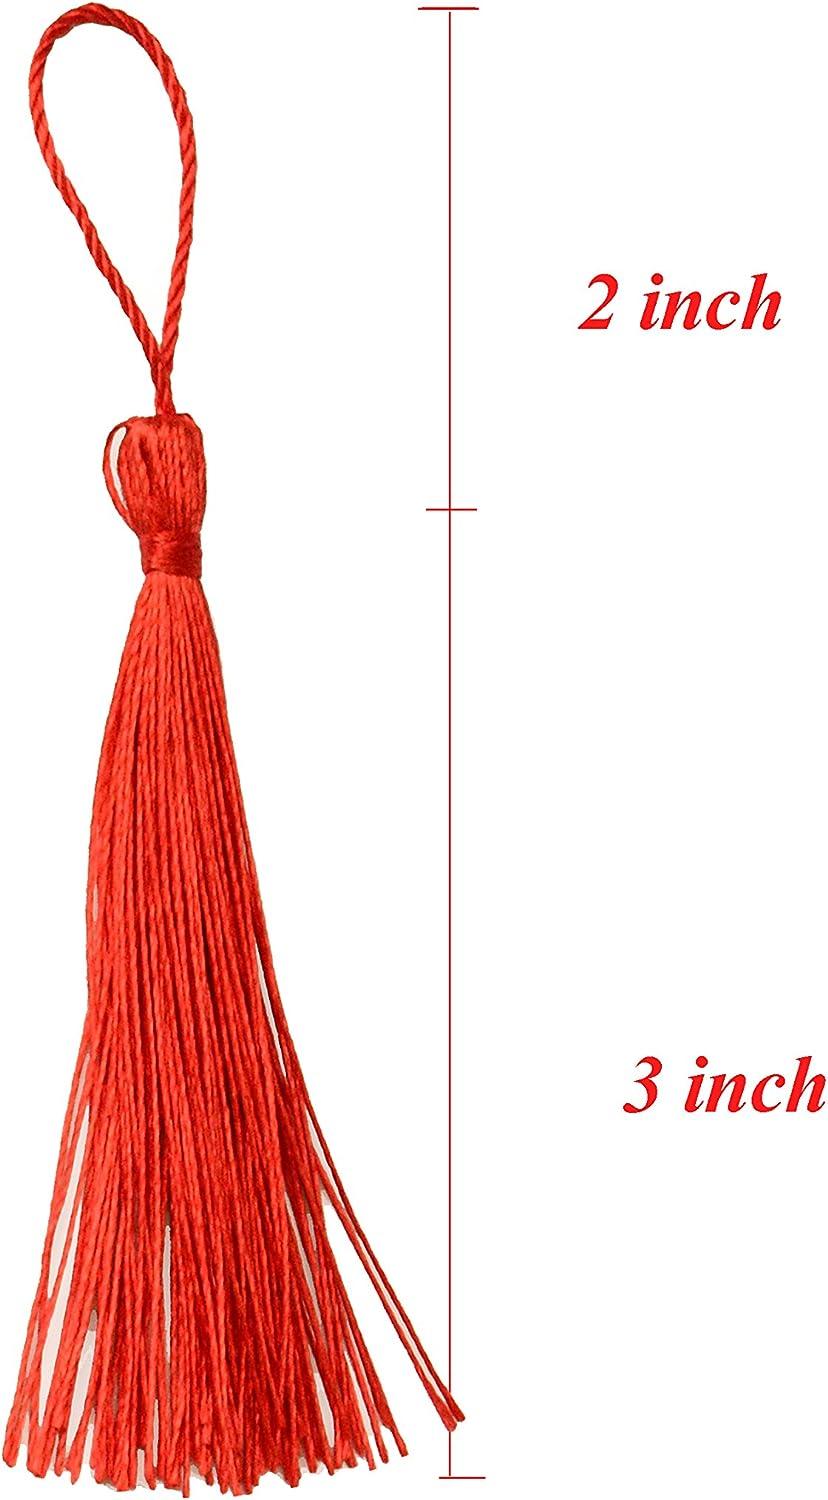  100 Pcs Bookmark Tassels for Crafts Keychain Graduation -  Bookmark Tassels for Crafts,Key Chain Tassels for Jewelry Making,Mini  Tassels for Graduation,Book Marks(Red)